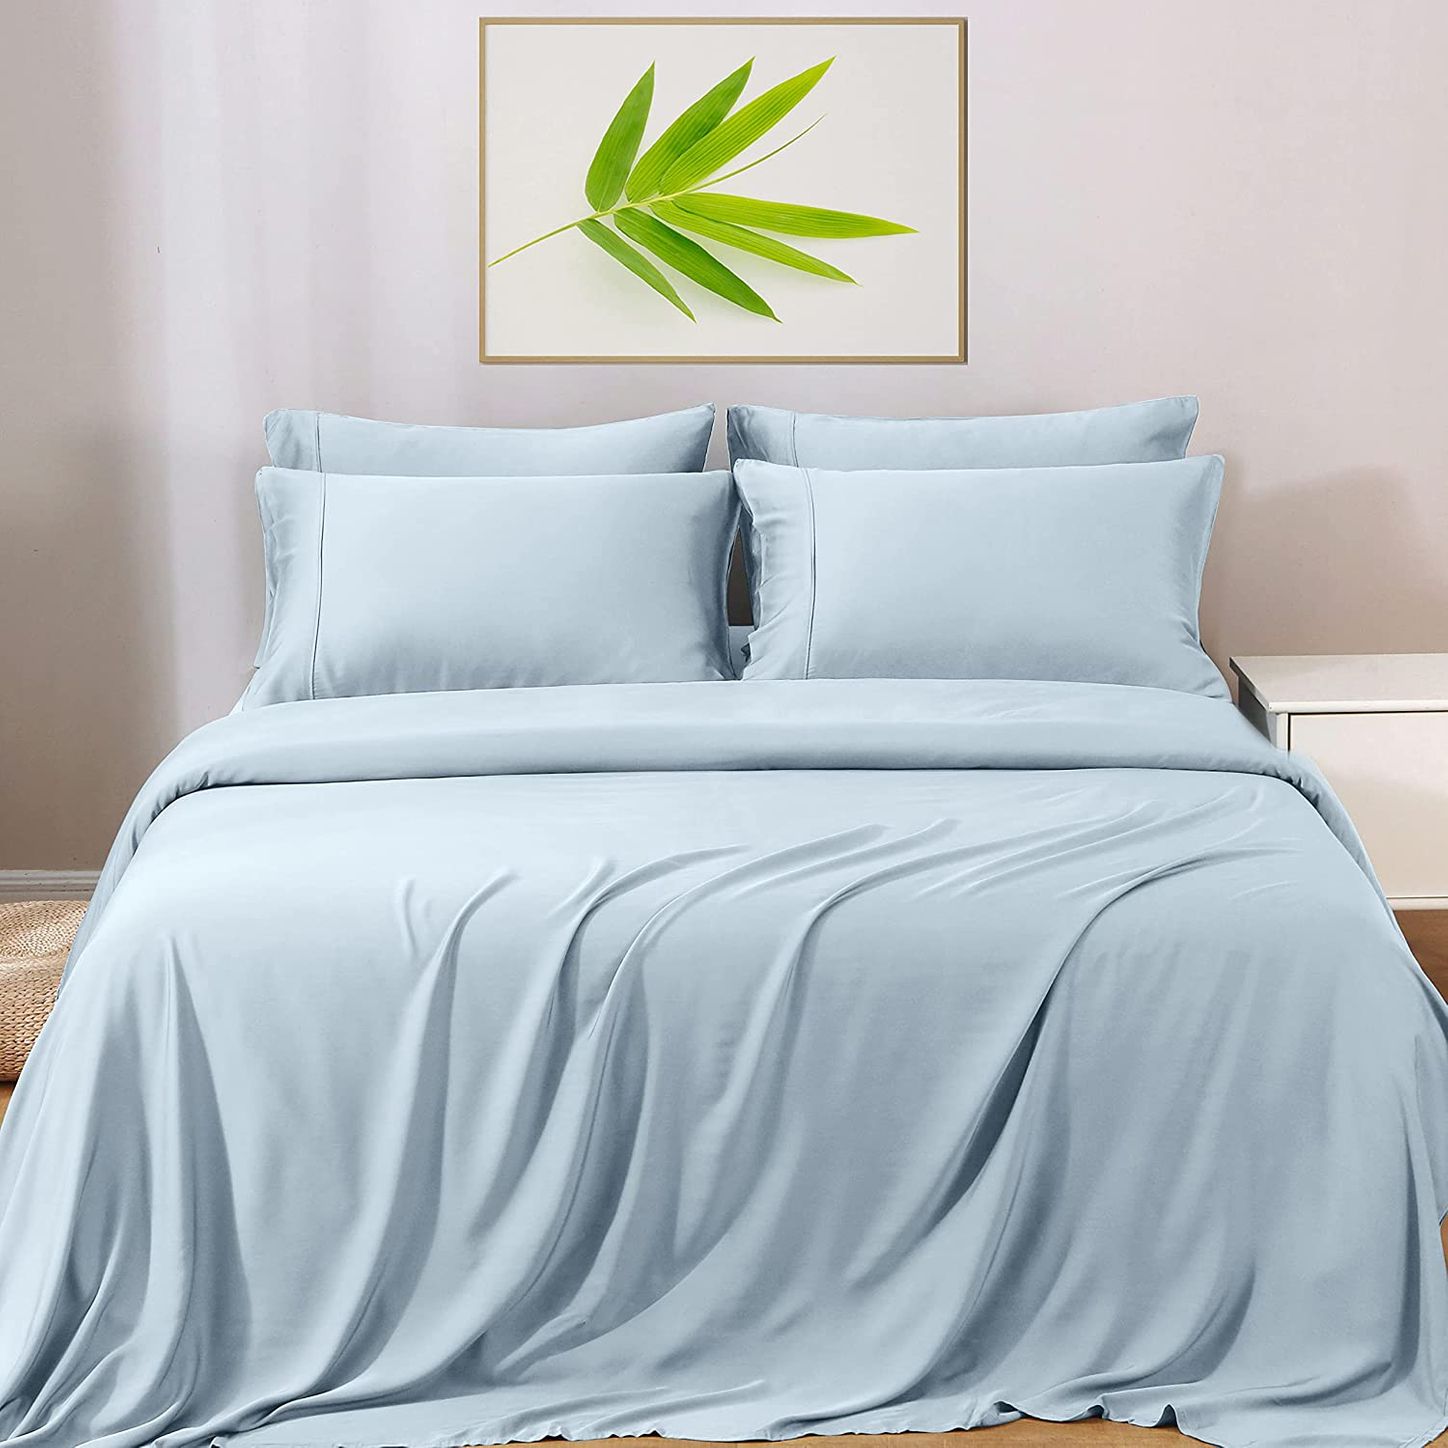 Comfortable Bed Sheets